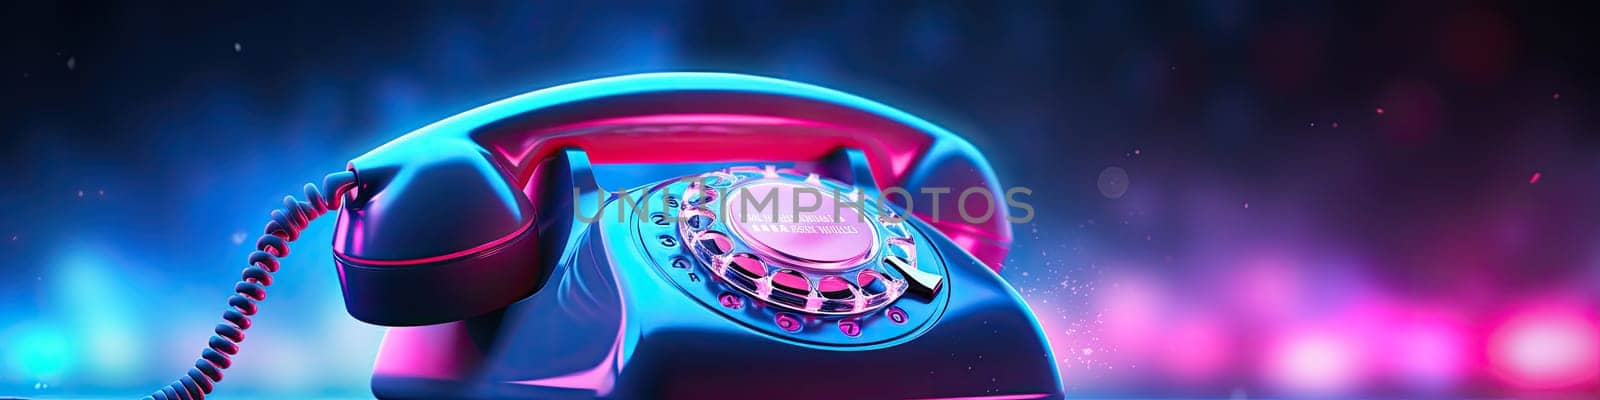 Telephone isolated on the blue and purple glowing background by Kadula